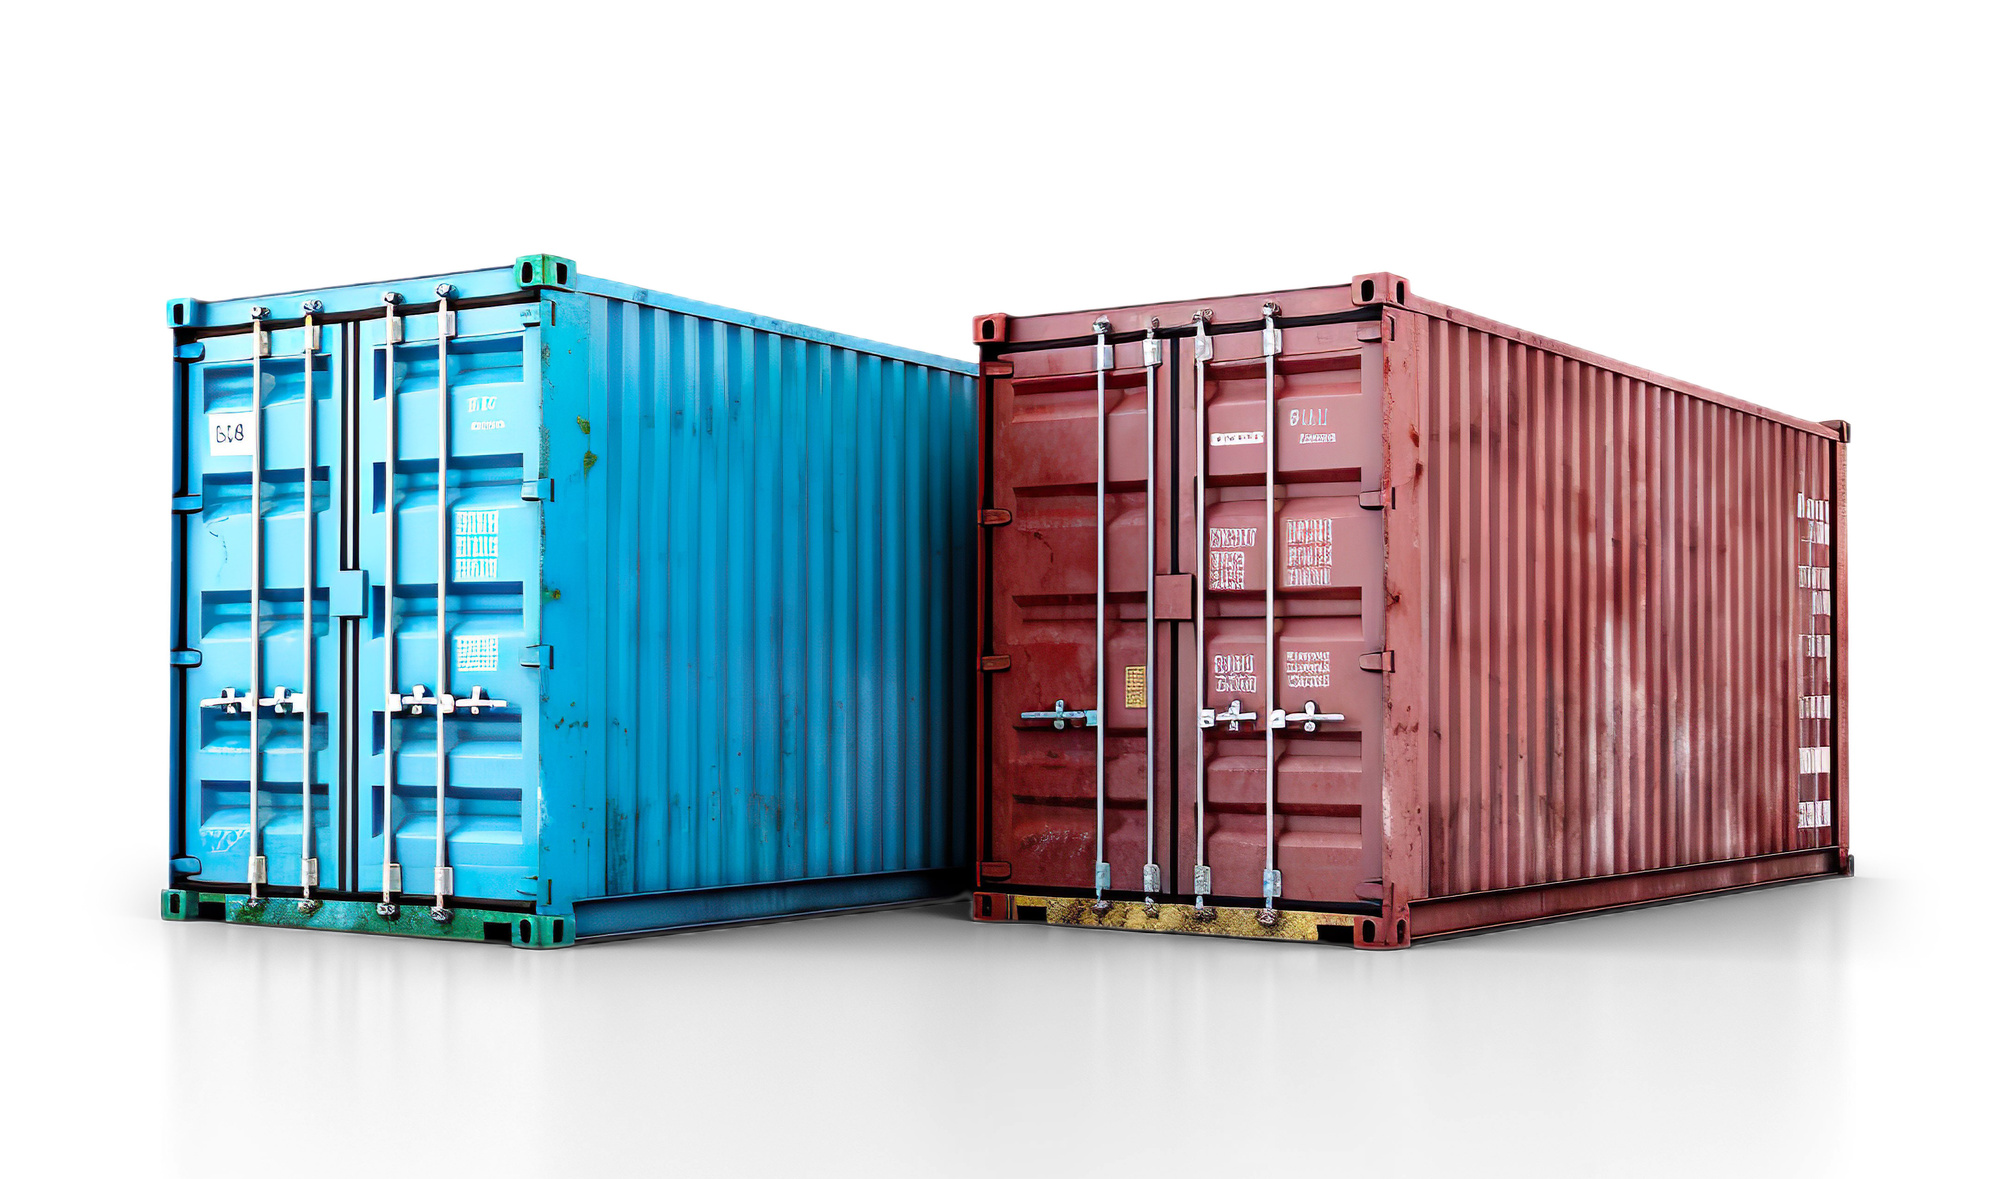 Cargo container isolated on white background